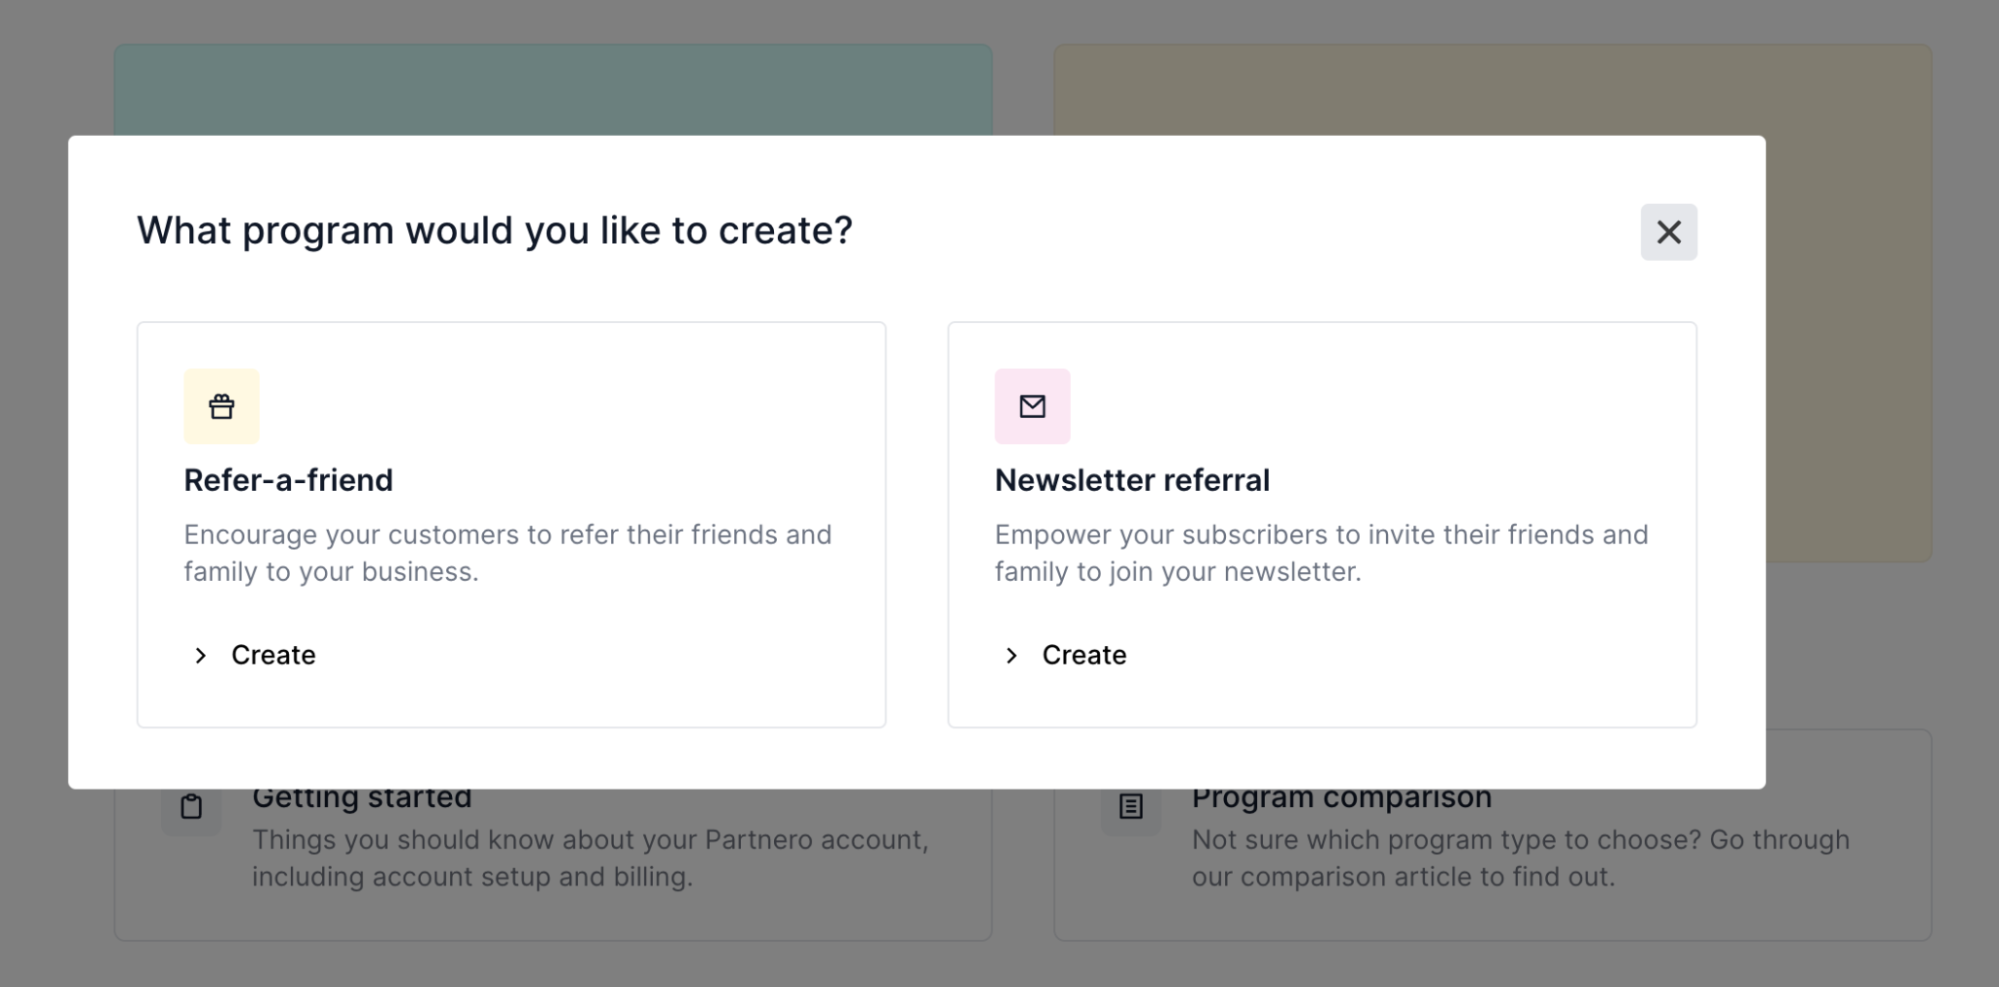 Partnero screenshot asking users to choose from a refer-a-friend or a newsletter referral program